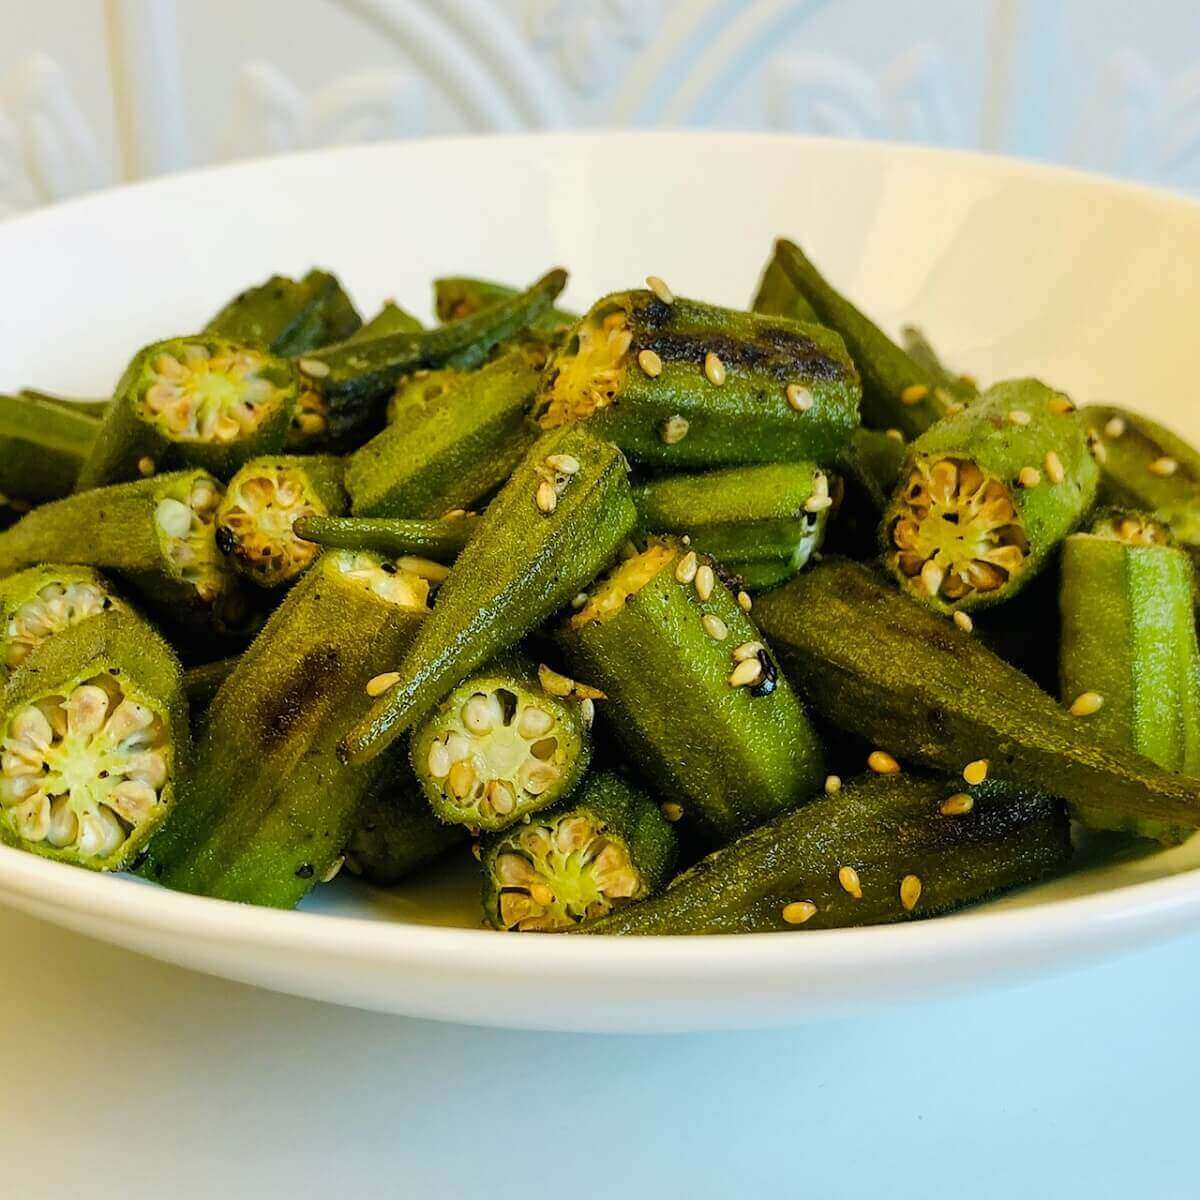 Roasted okra piled in a bowl.